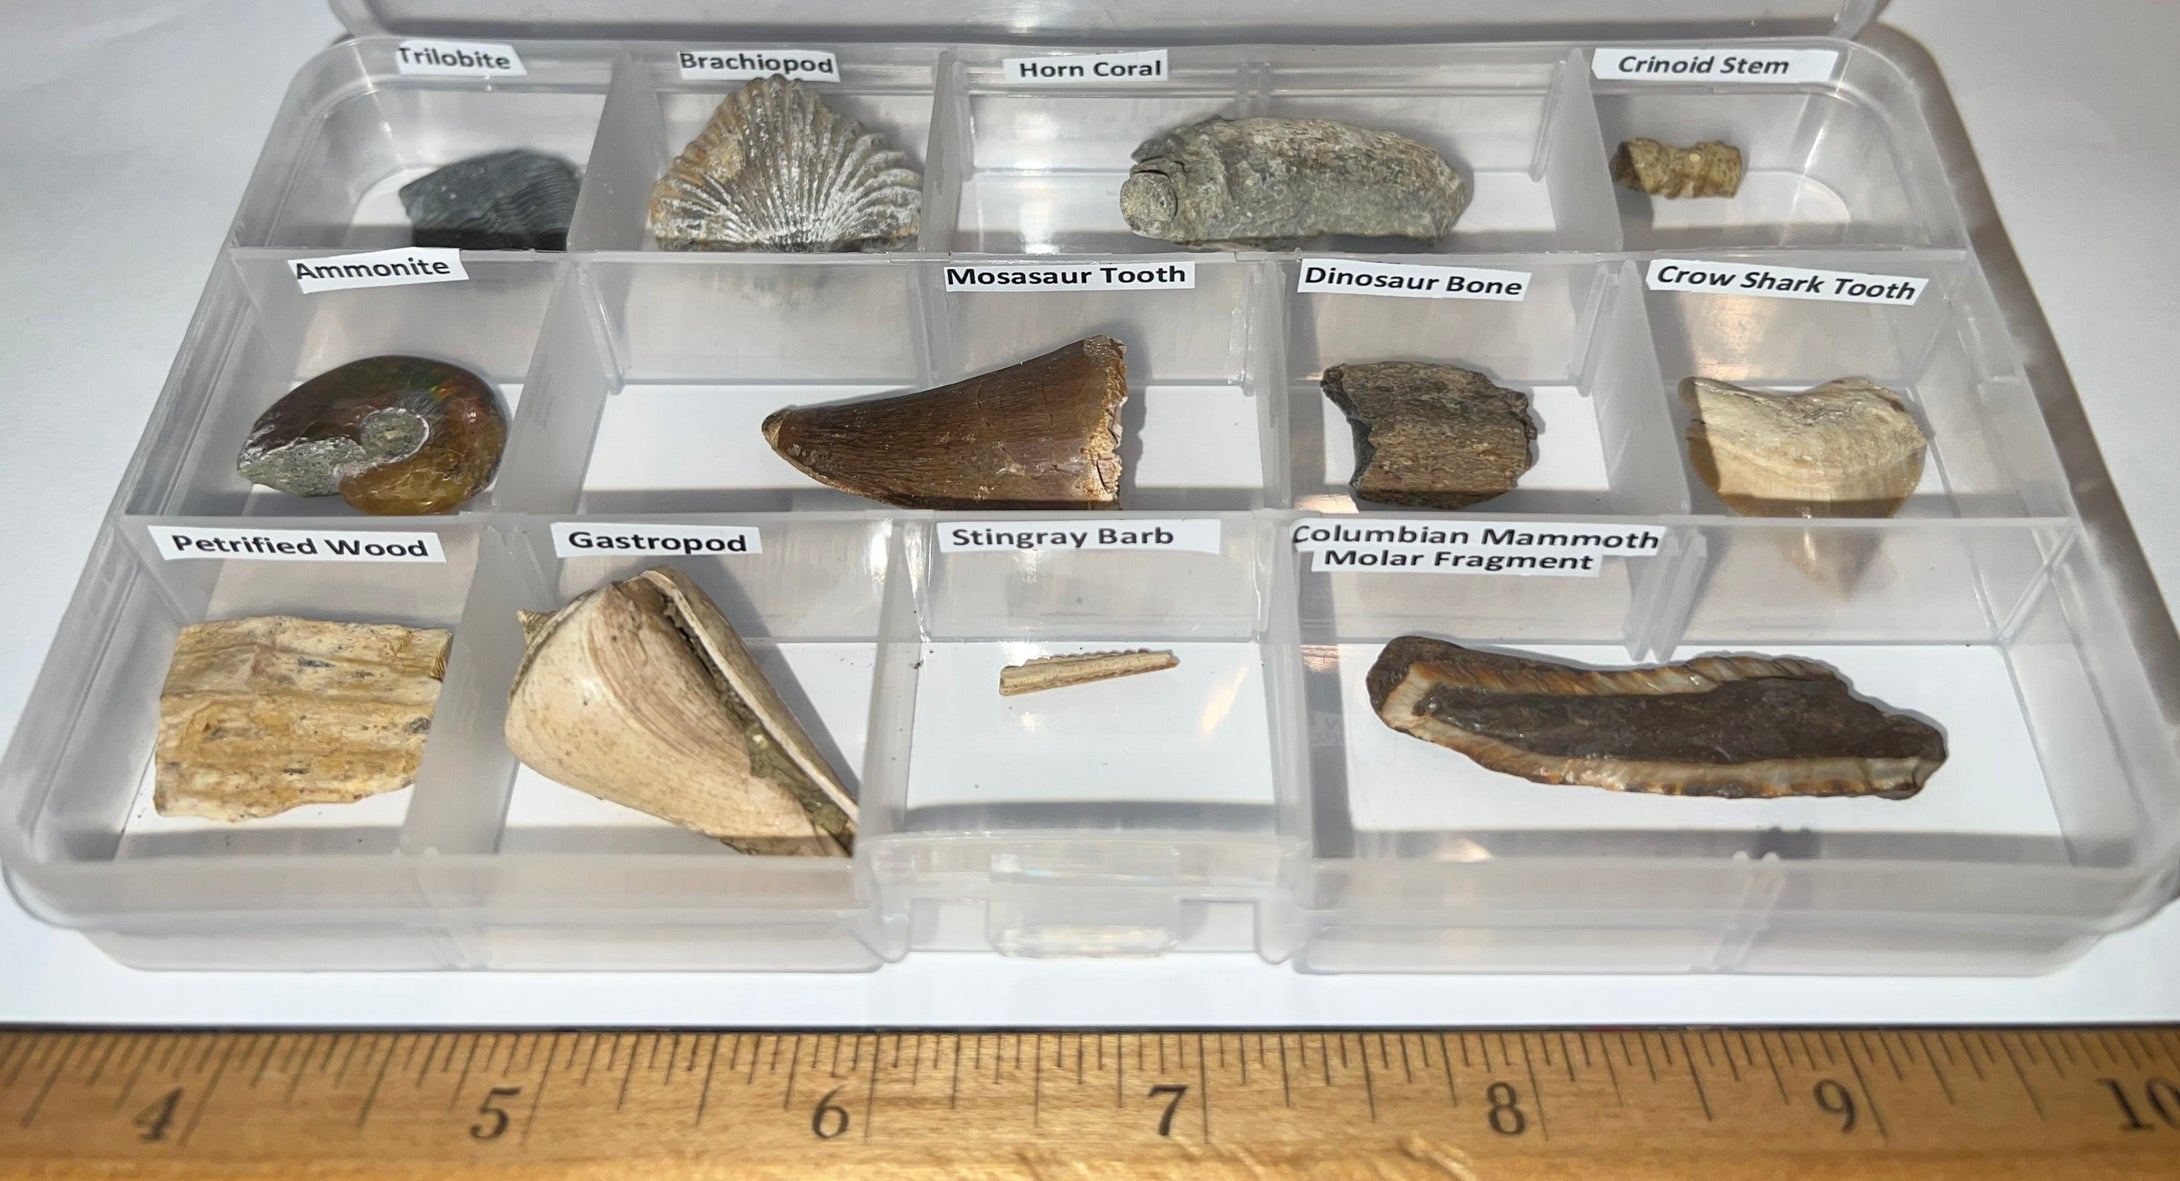 Beginner Collection of 12 labeled Fossils in a clear case. Includes Mosasaur Tooth, Dinosaur Bone Fragment, Mammoth Tooth Fragment and more!